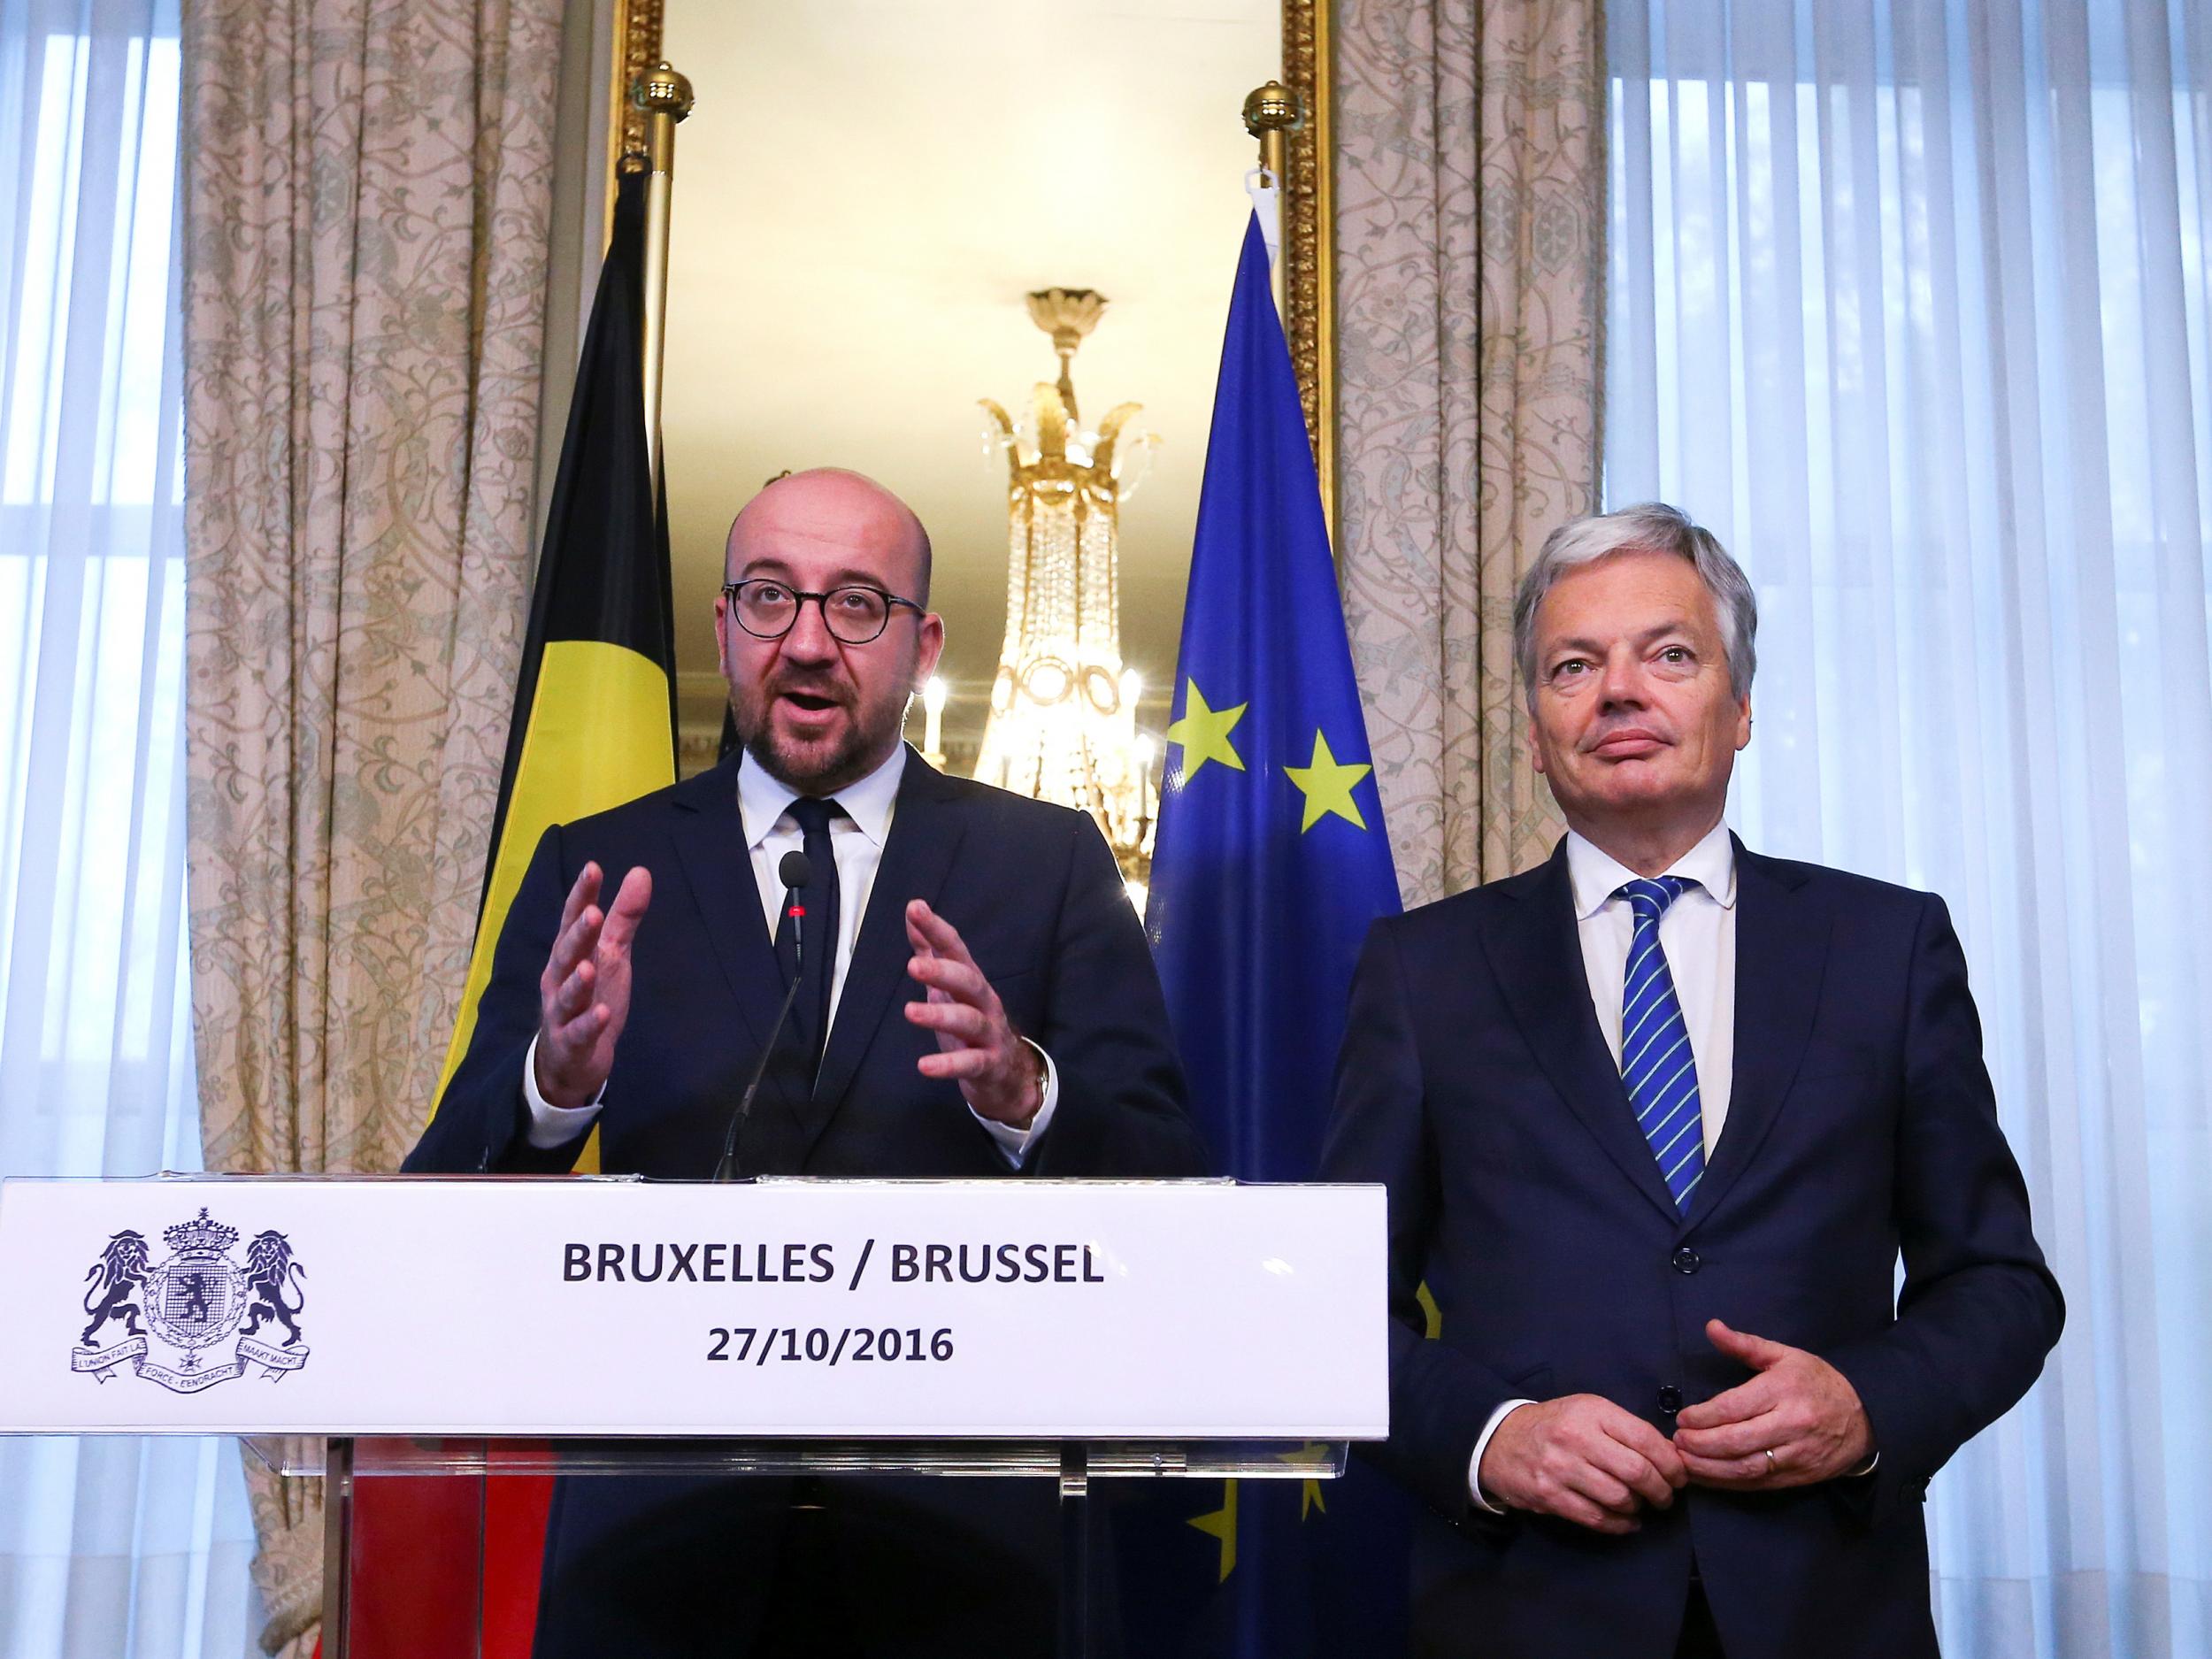 Belgium’s Prime Minister Charles Michel called the deal an ‘important step’ 